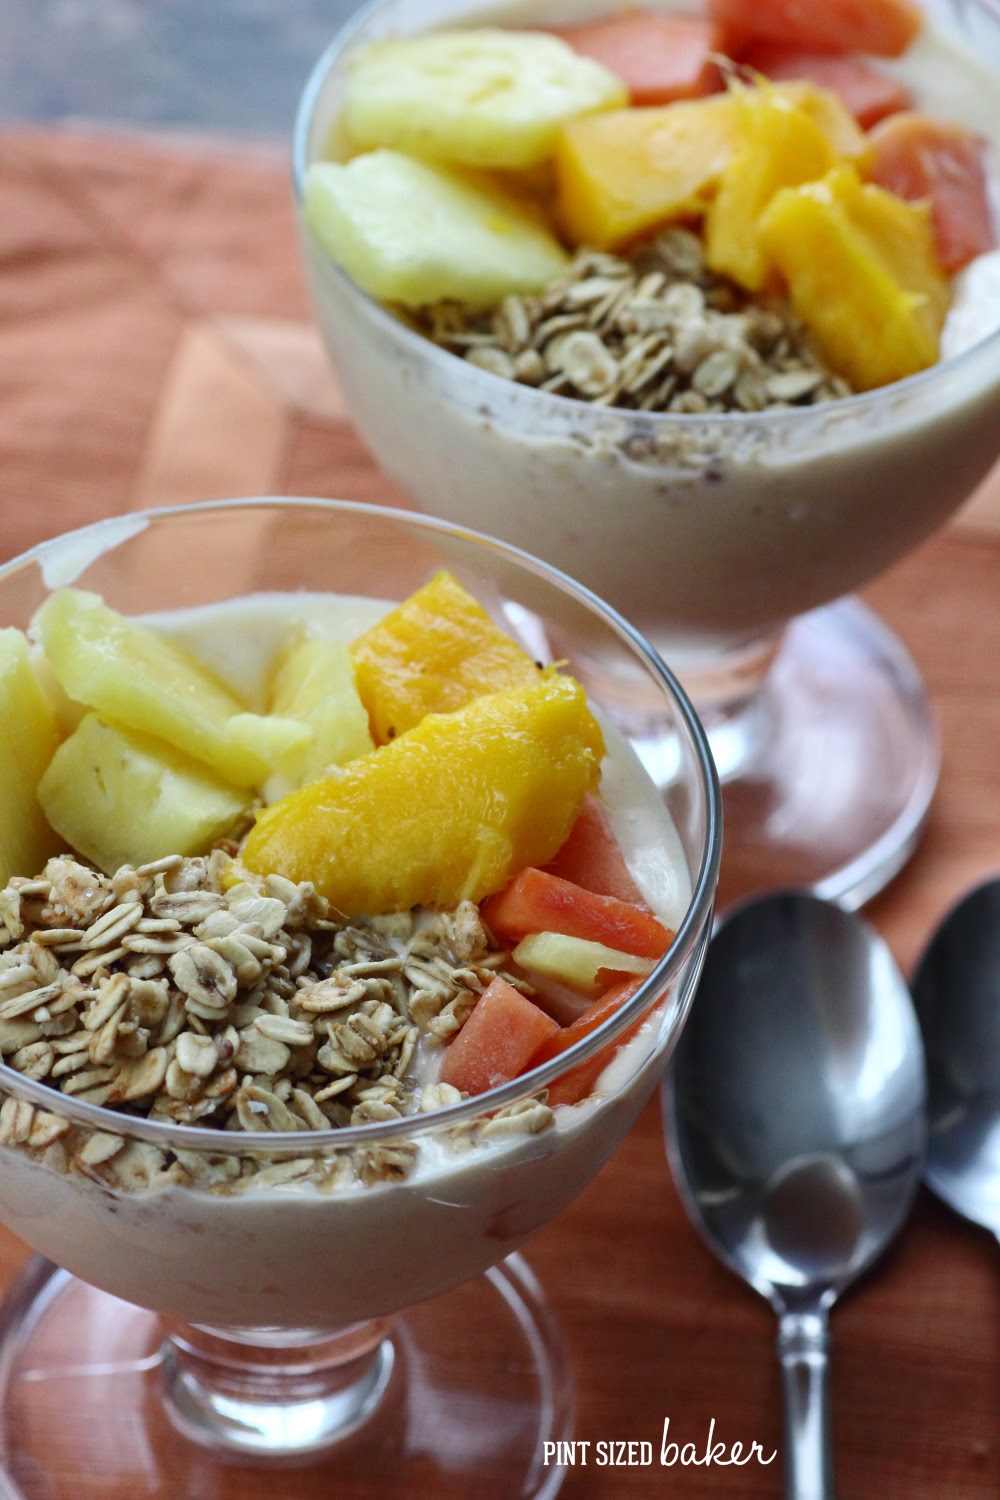 I'm loving these tropical smoothie bowls with fresh pineapple, mango, and papaya with added crunchy granola. It's a great way to fuel up to get the day going.